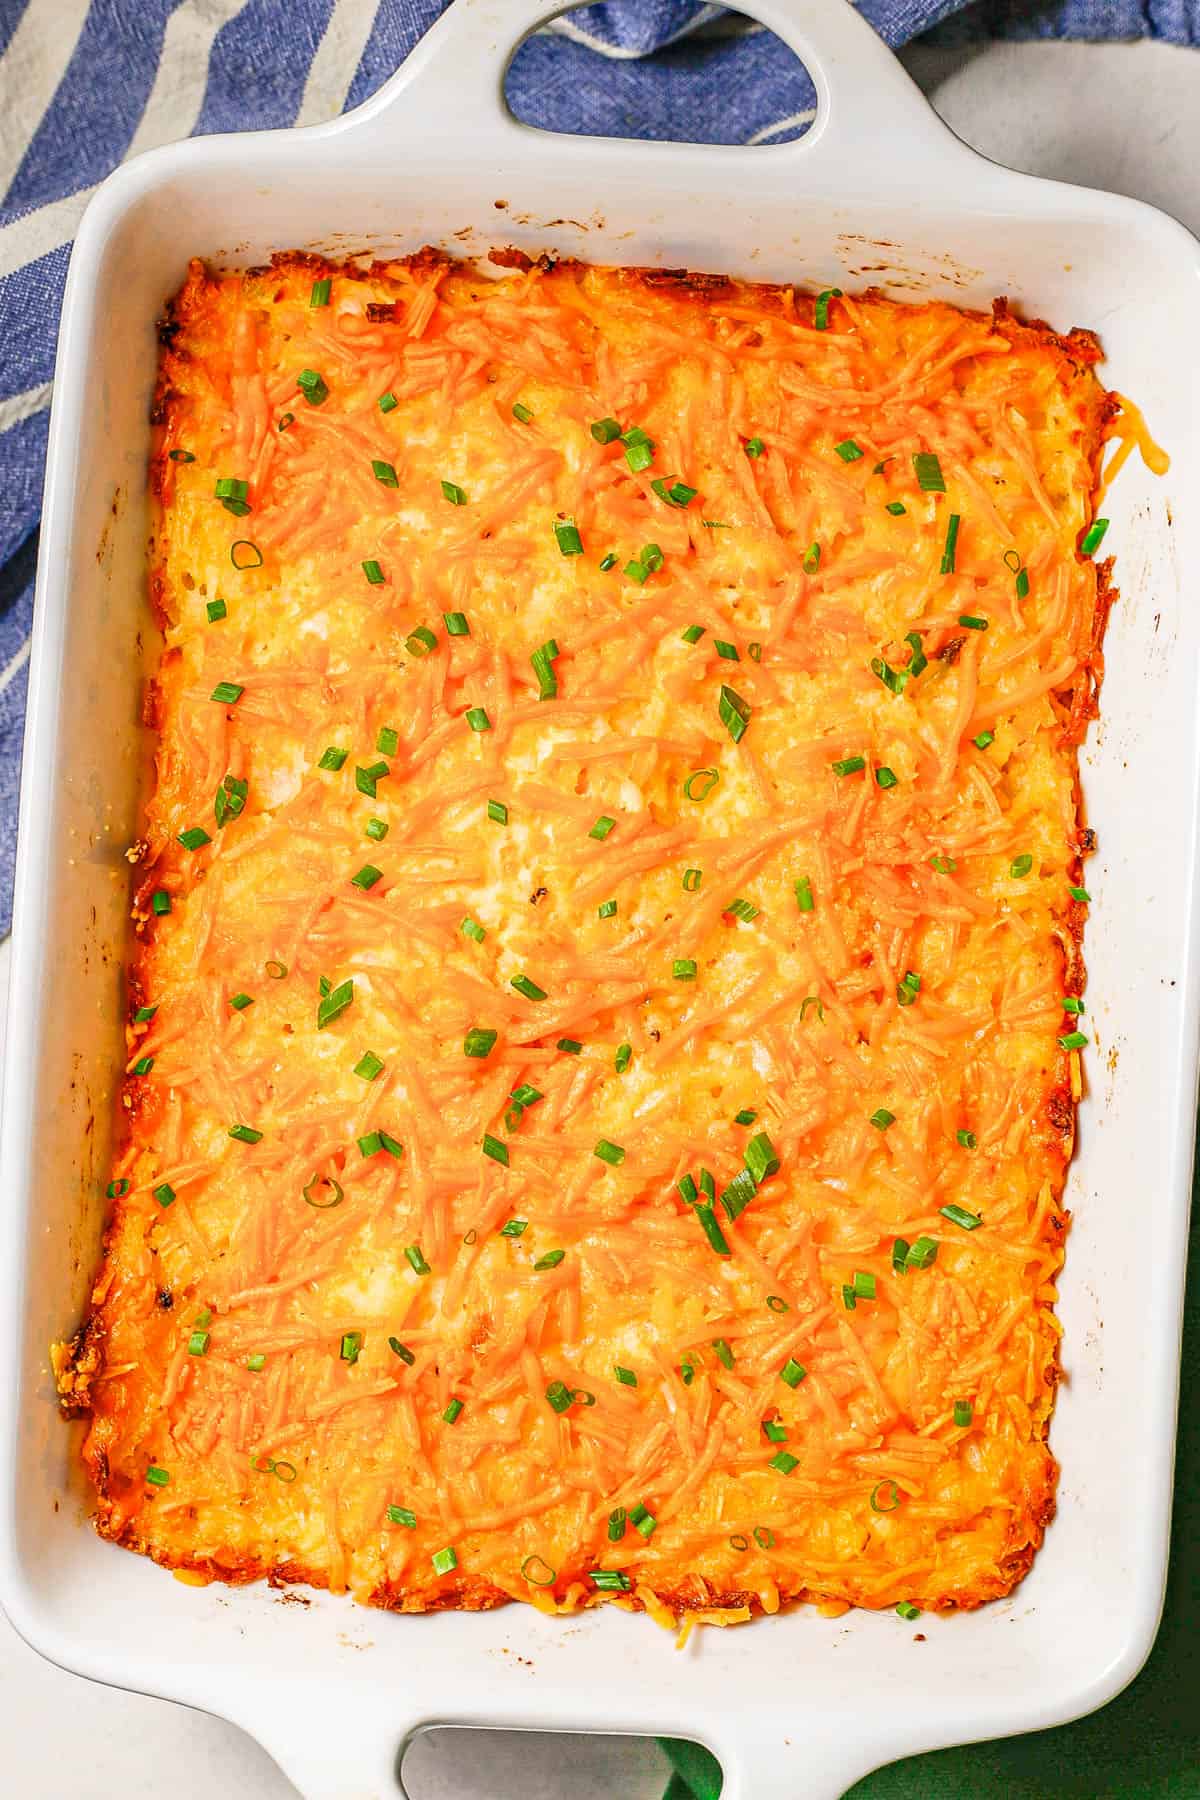 Baked cheesy hash brown casserole in a large rectangular white baking dish with sliced green onions sprinkled on top.